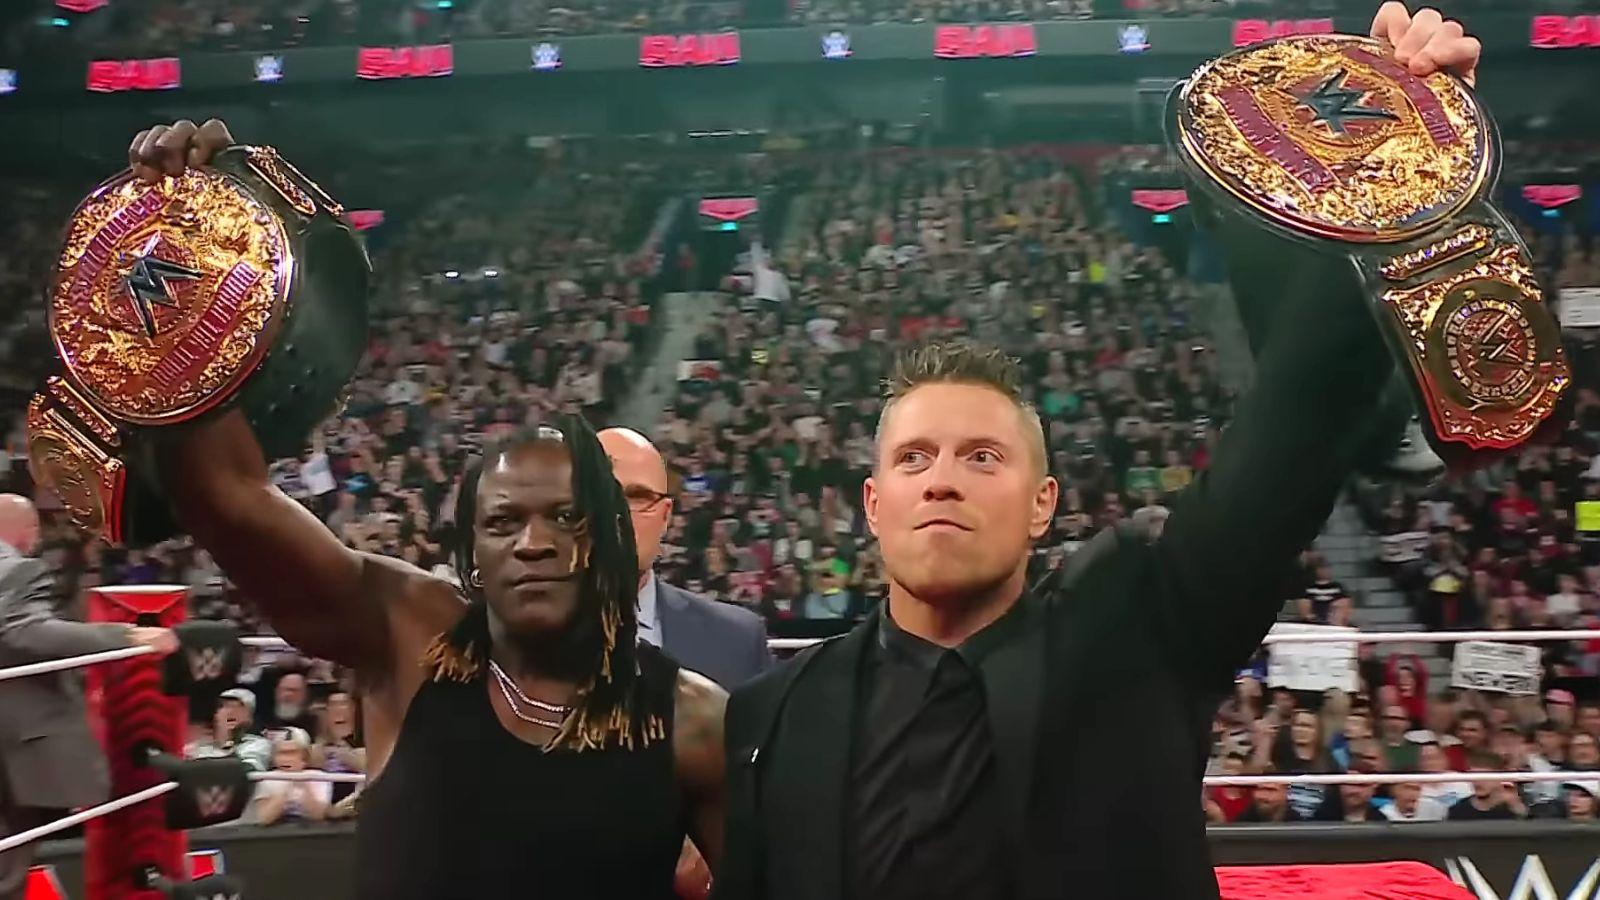 R-Truth (left) and The Miz (right) as part of the tag team duo Awesome Truth holding their World Tag Team Championship belts on the April 15 episode of WWE Raw.